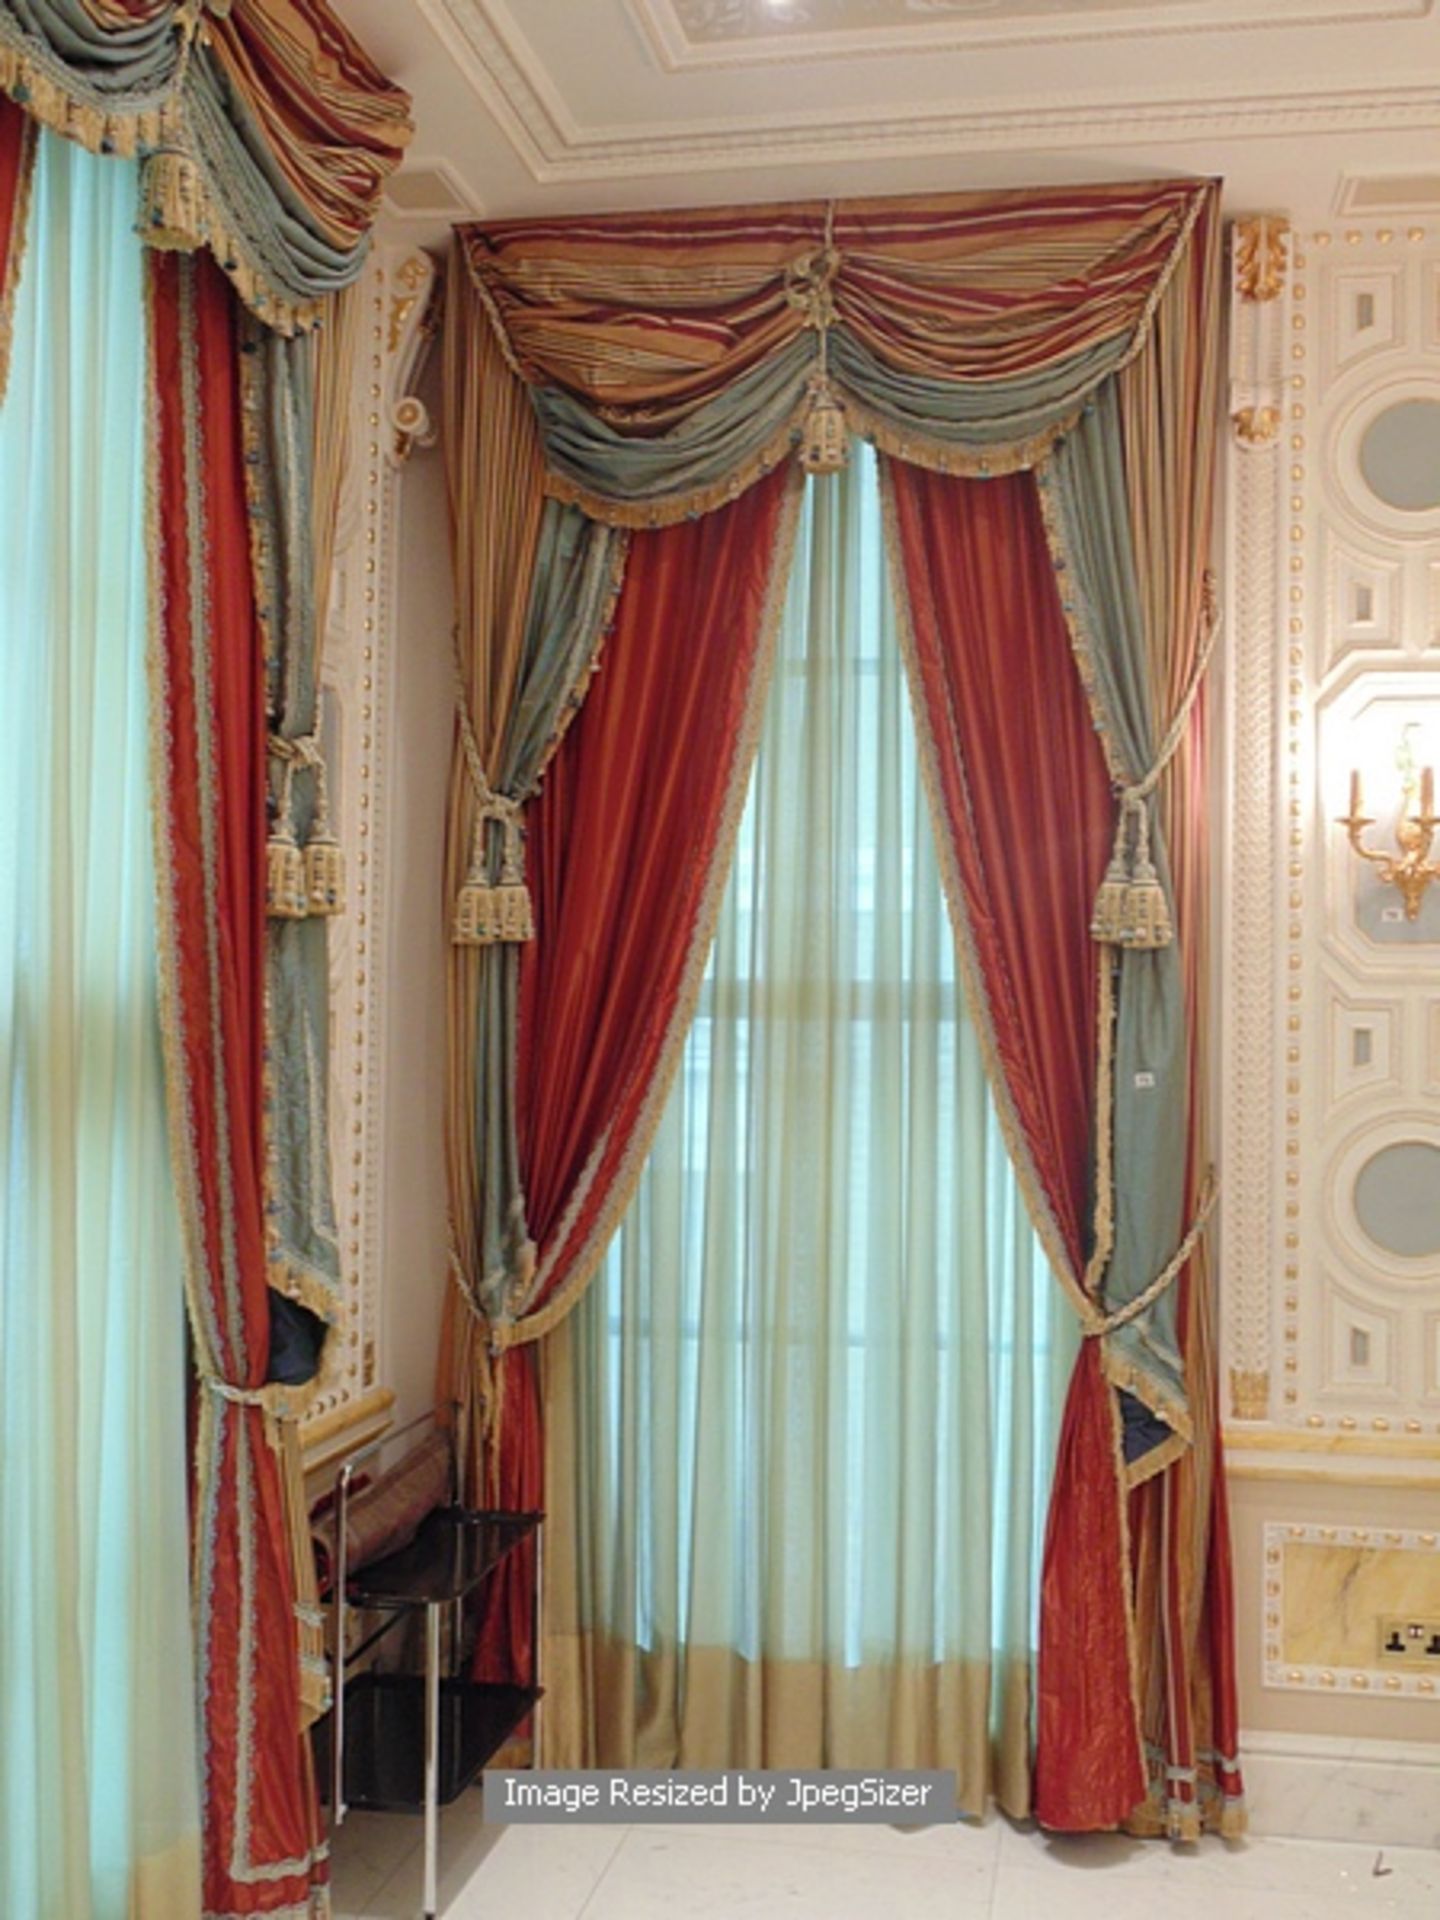 A pair of gold and aquamarine curtains supplied by Jacquard from Rudolph Ackermann`s A series design